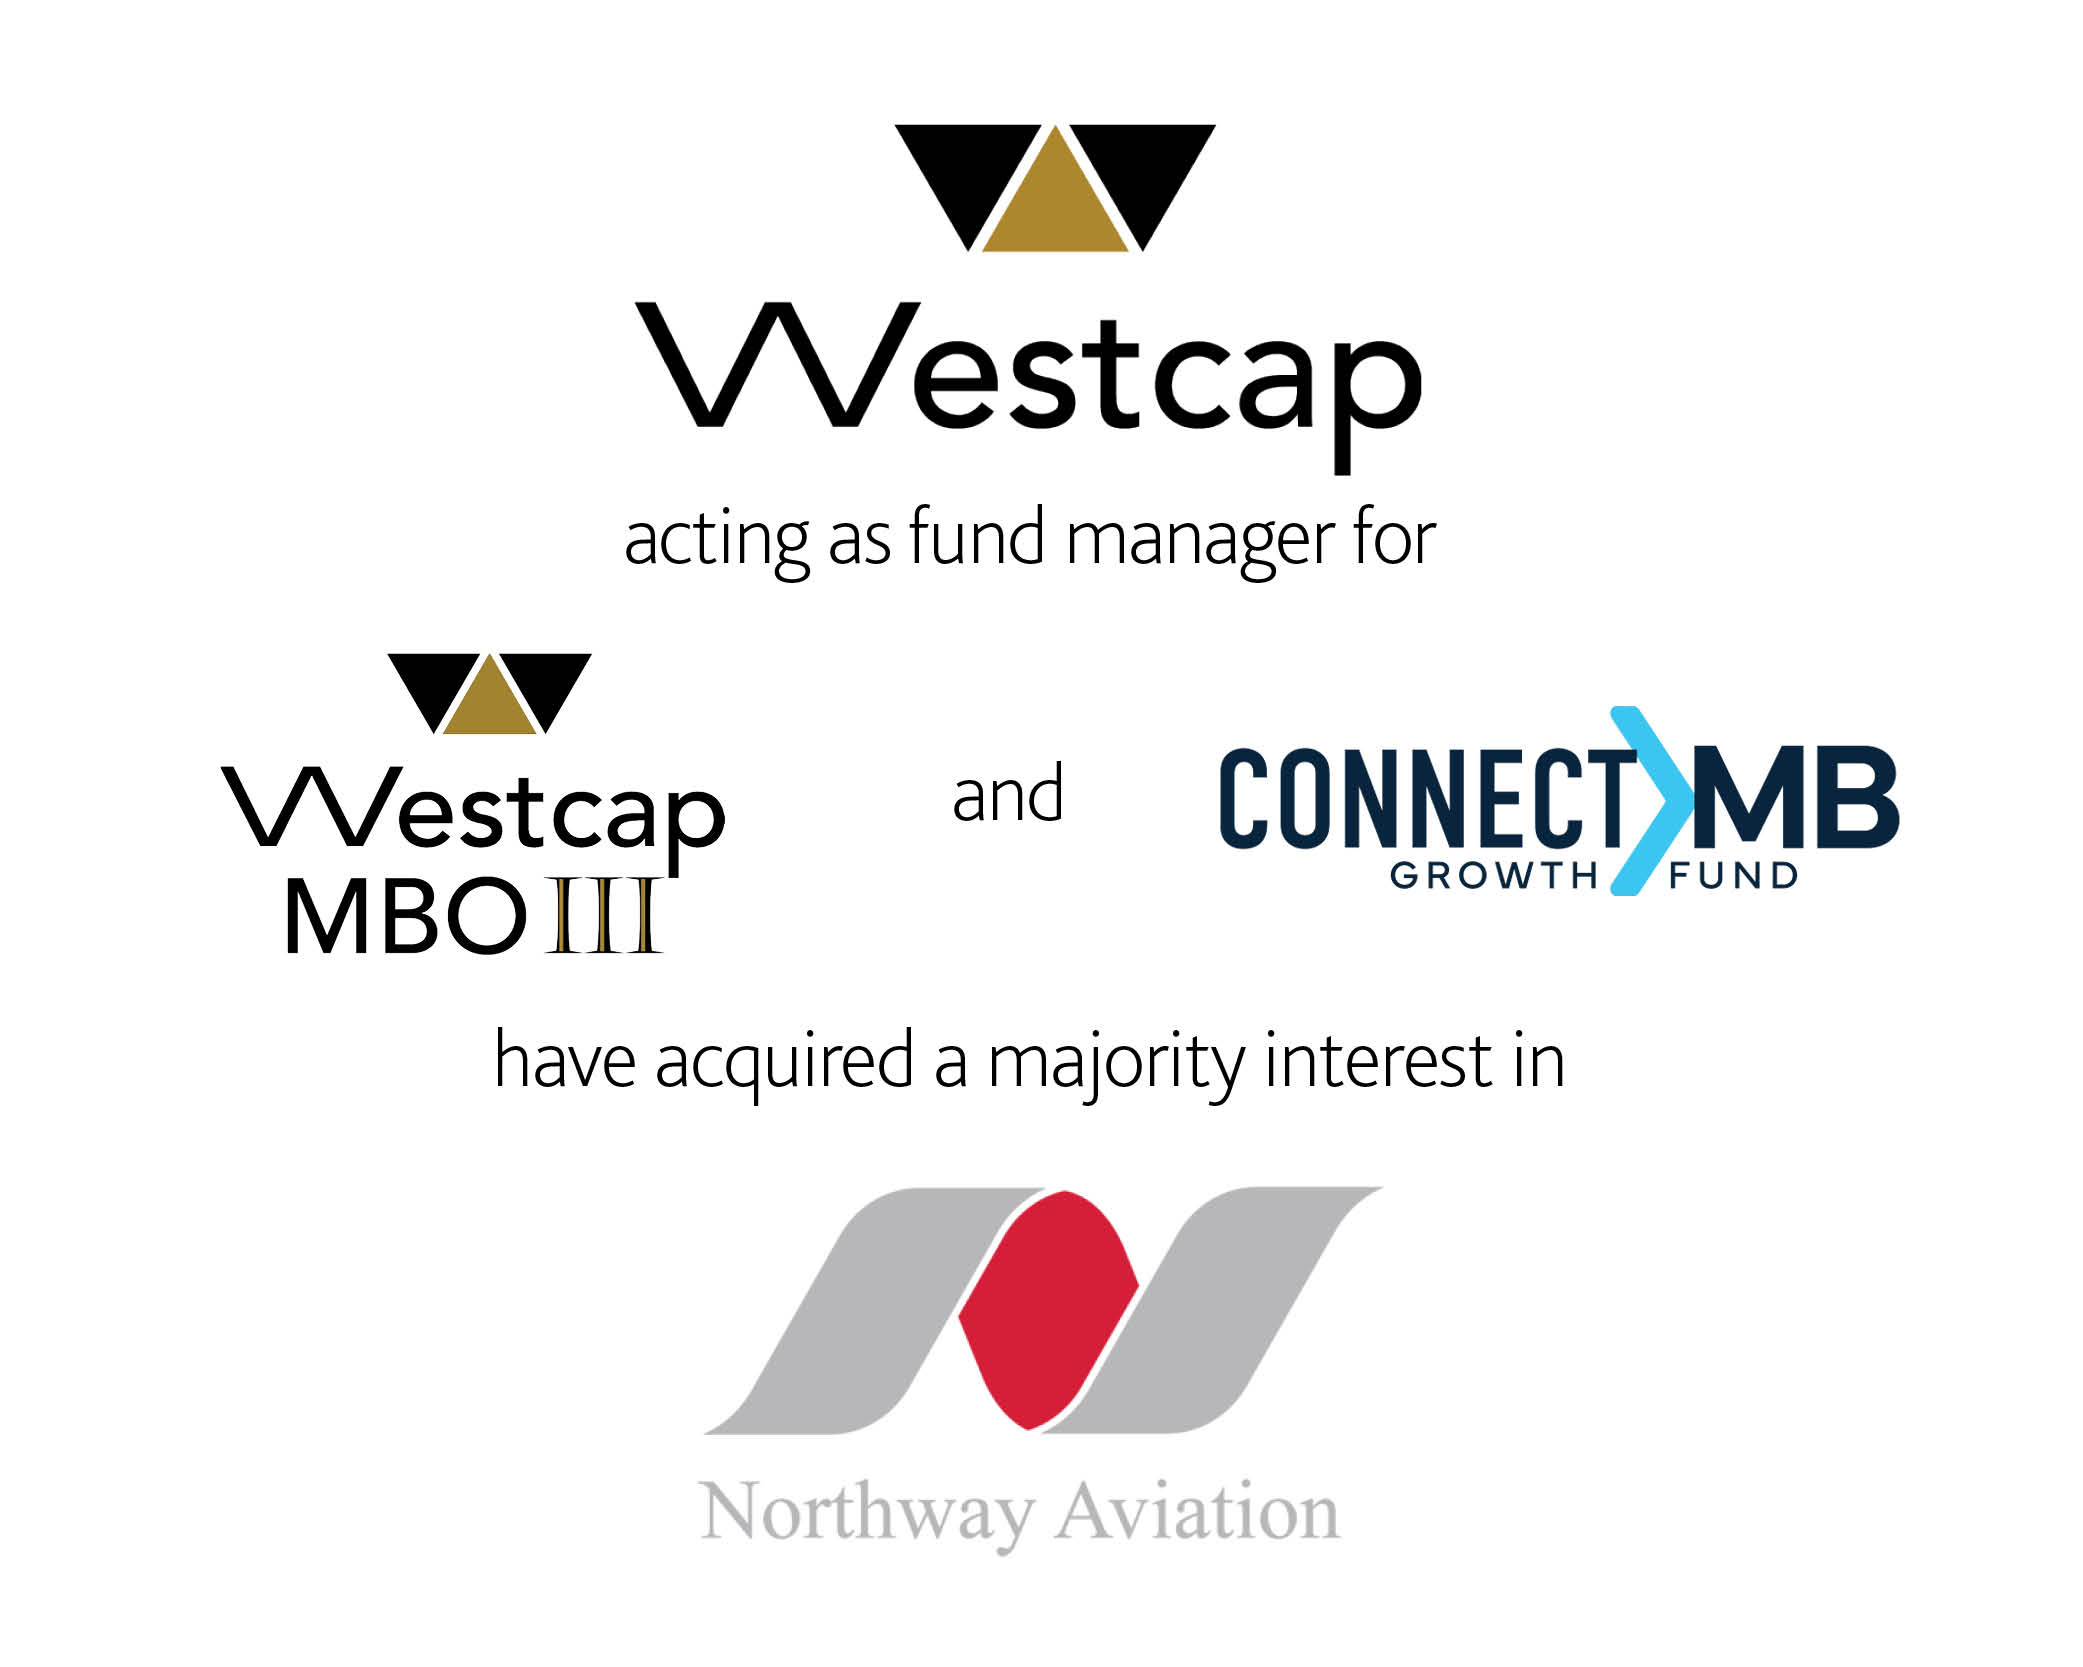 Westcap acting as fund manager for Westcap MBO III and Connect MB have acquired Northway Aviation.